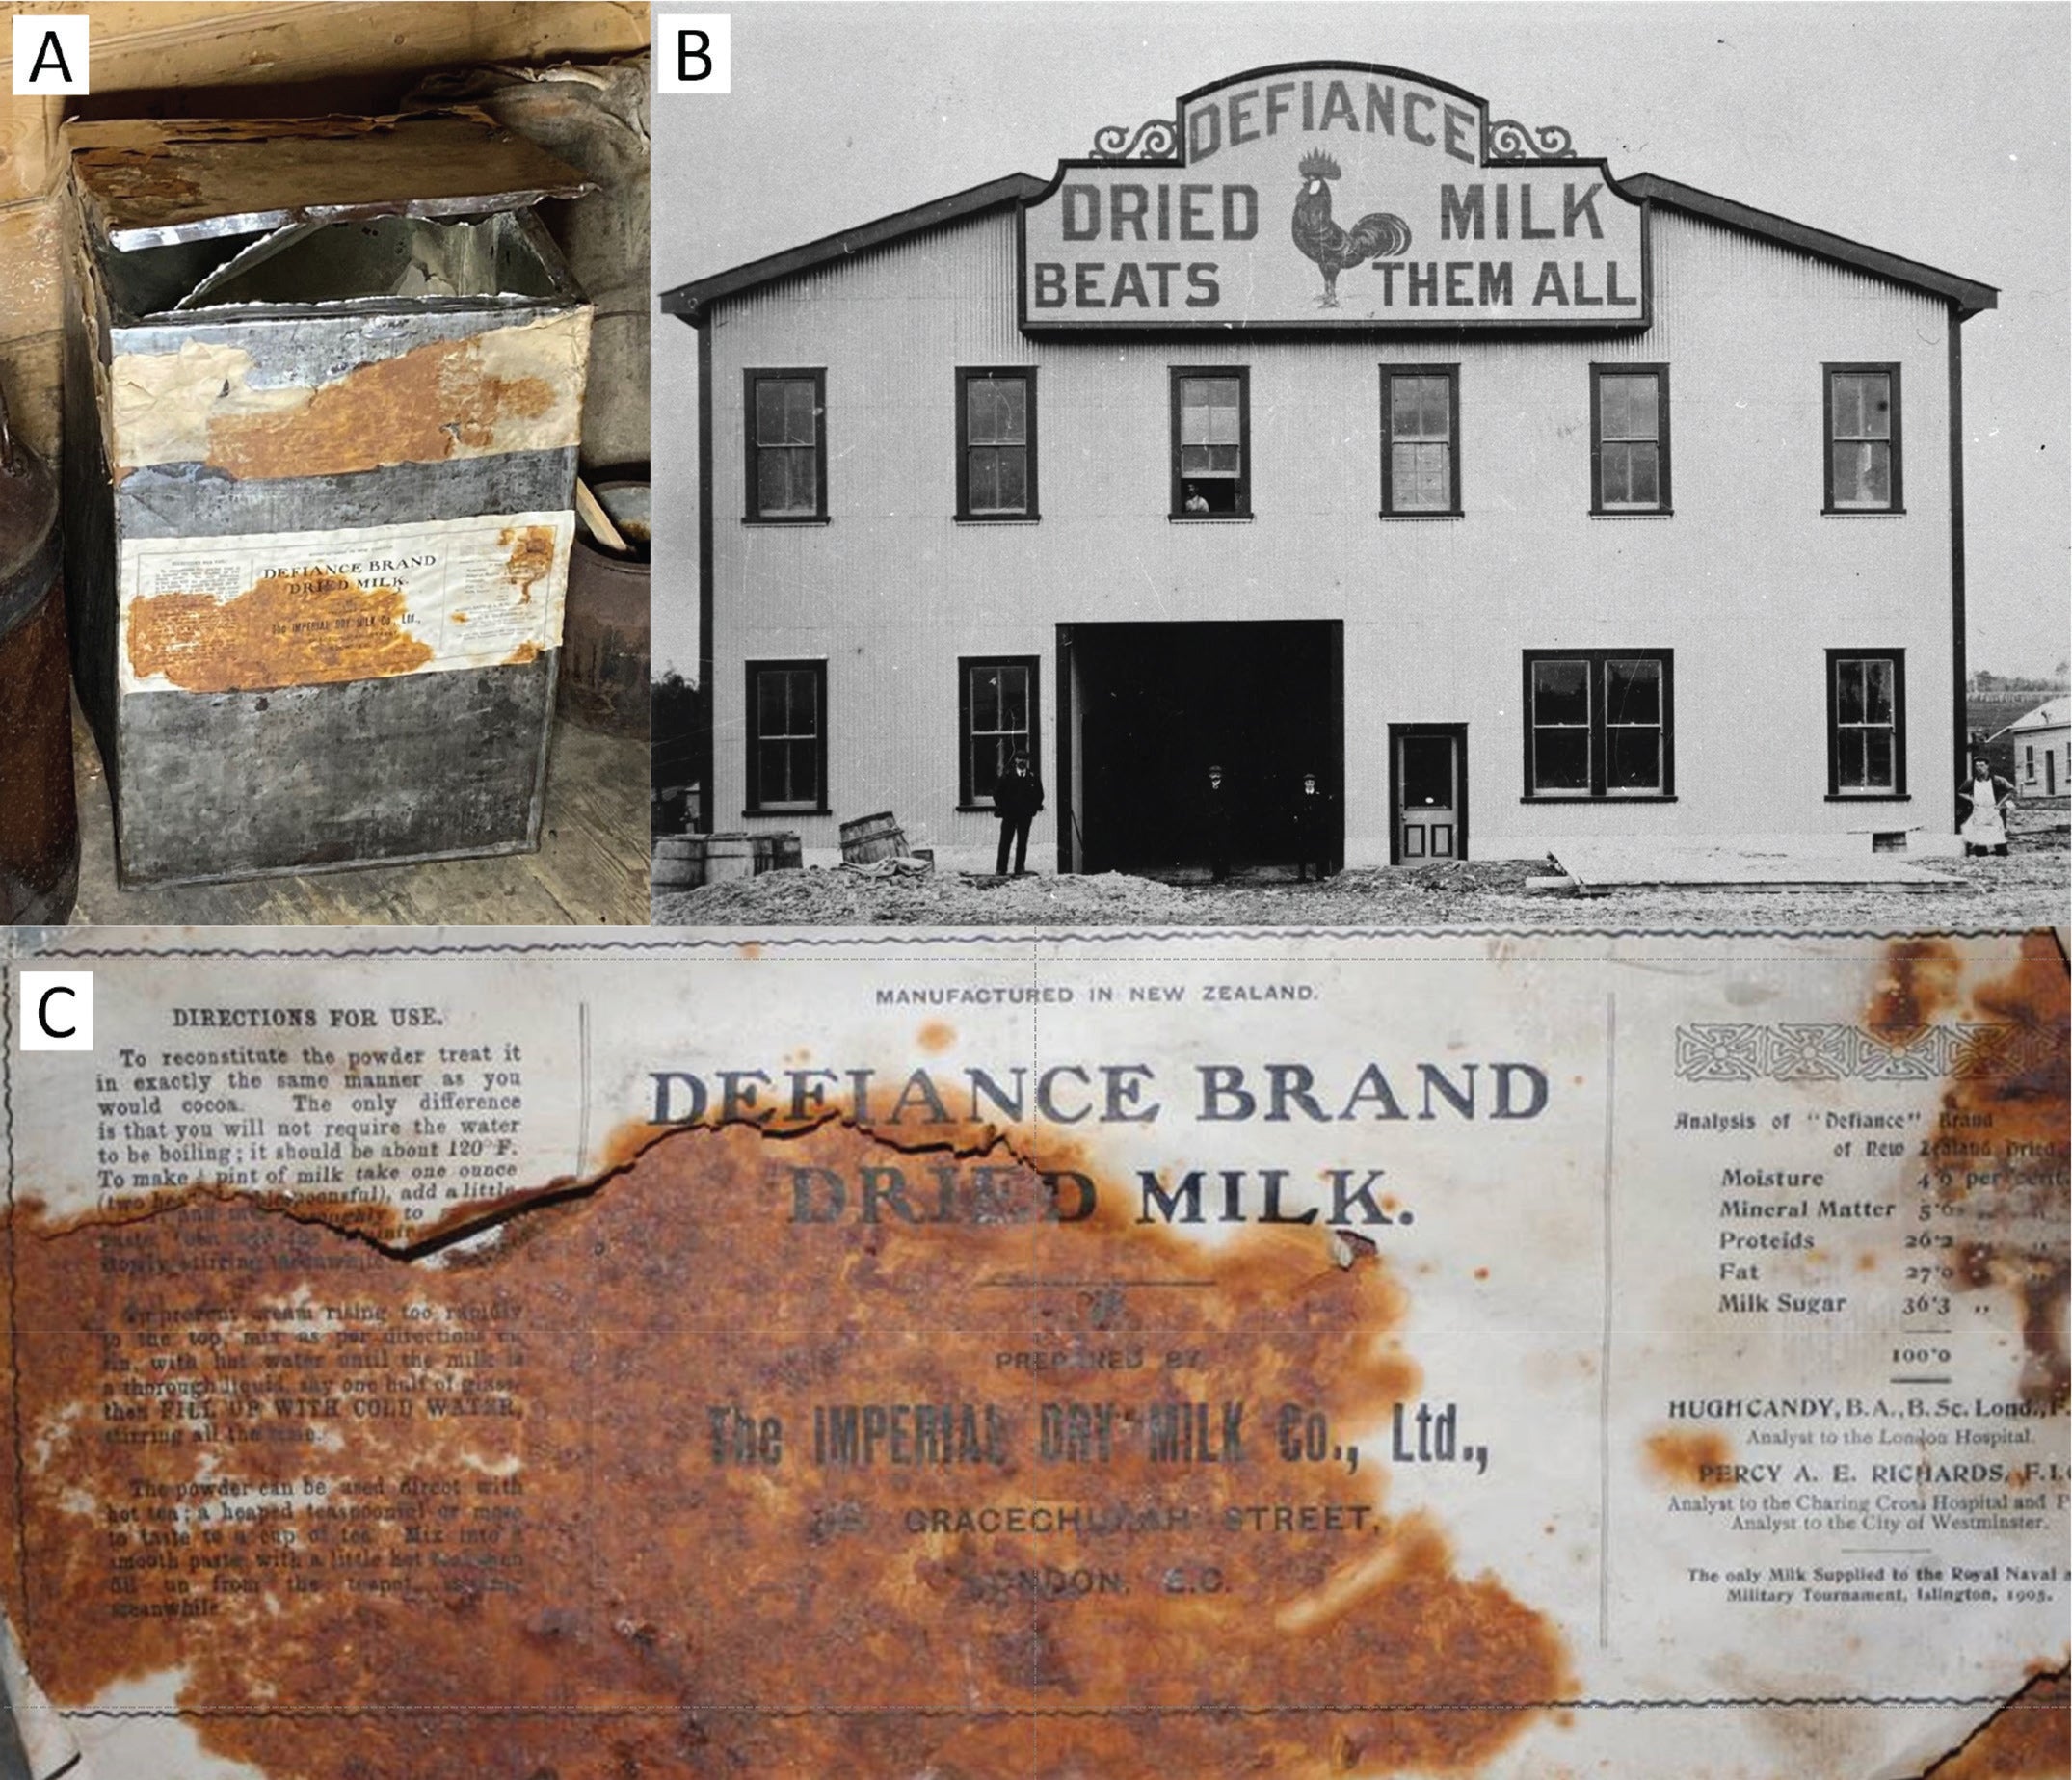 The photo on the top left (A) shows the tin-plated can of Defiance brand dried milk found in Shackletonâs Cape Royds base camp hut, with a close-up label in the bottom photo (C) (courtesy of the Antarctic Heritage Trust, Christchurch, New Zealand). The top-right photo (B) is of the Joseph Nathan & Sons Bunnythorpe Defiance Dried Milk Factory circa 1904 (courtesy of Massey University, Palmerston North, New Zealand).